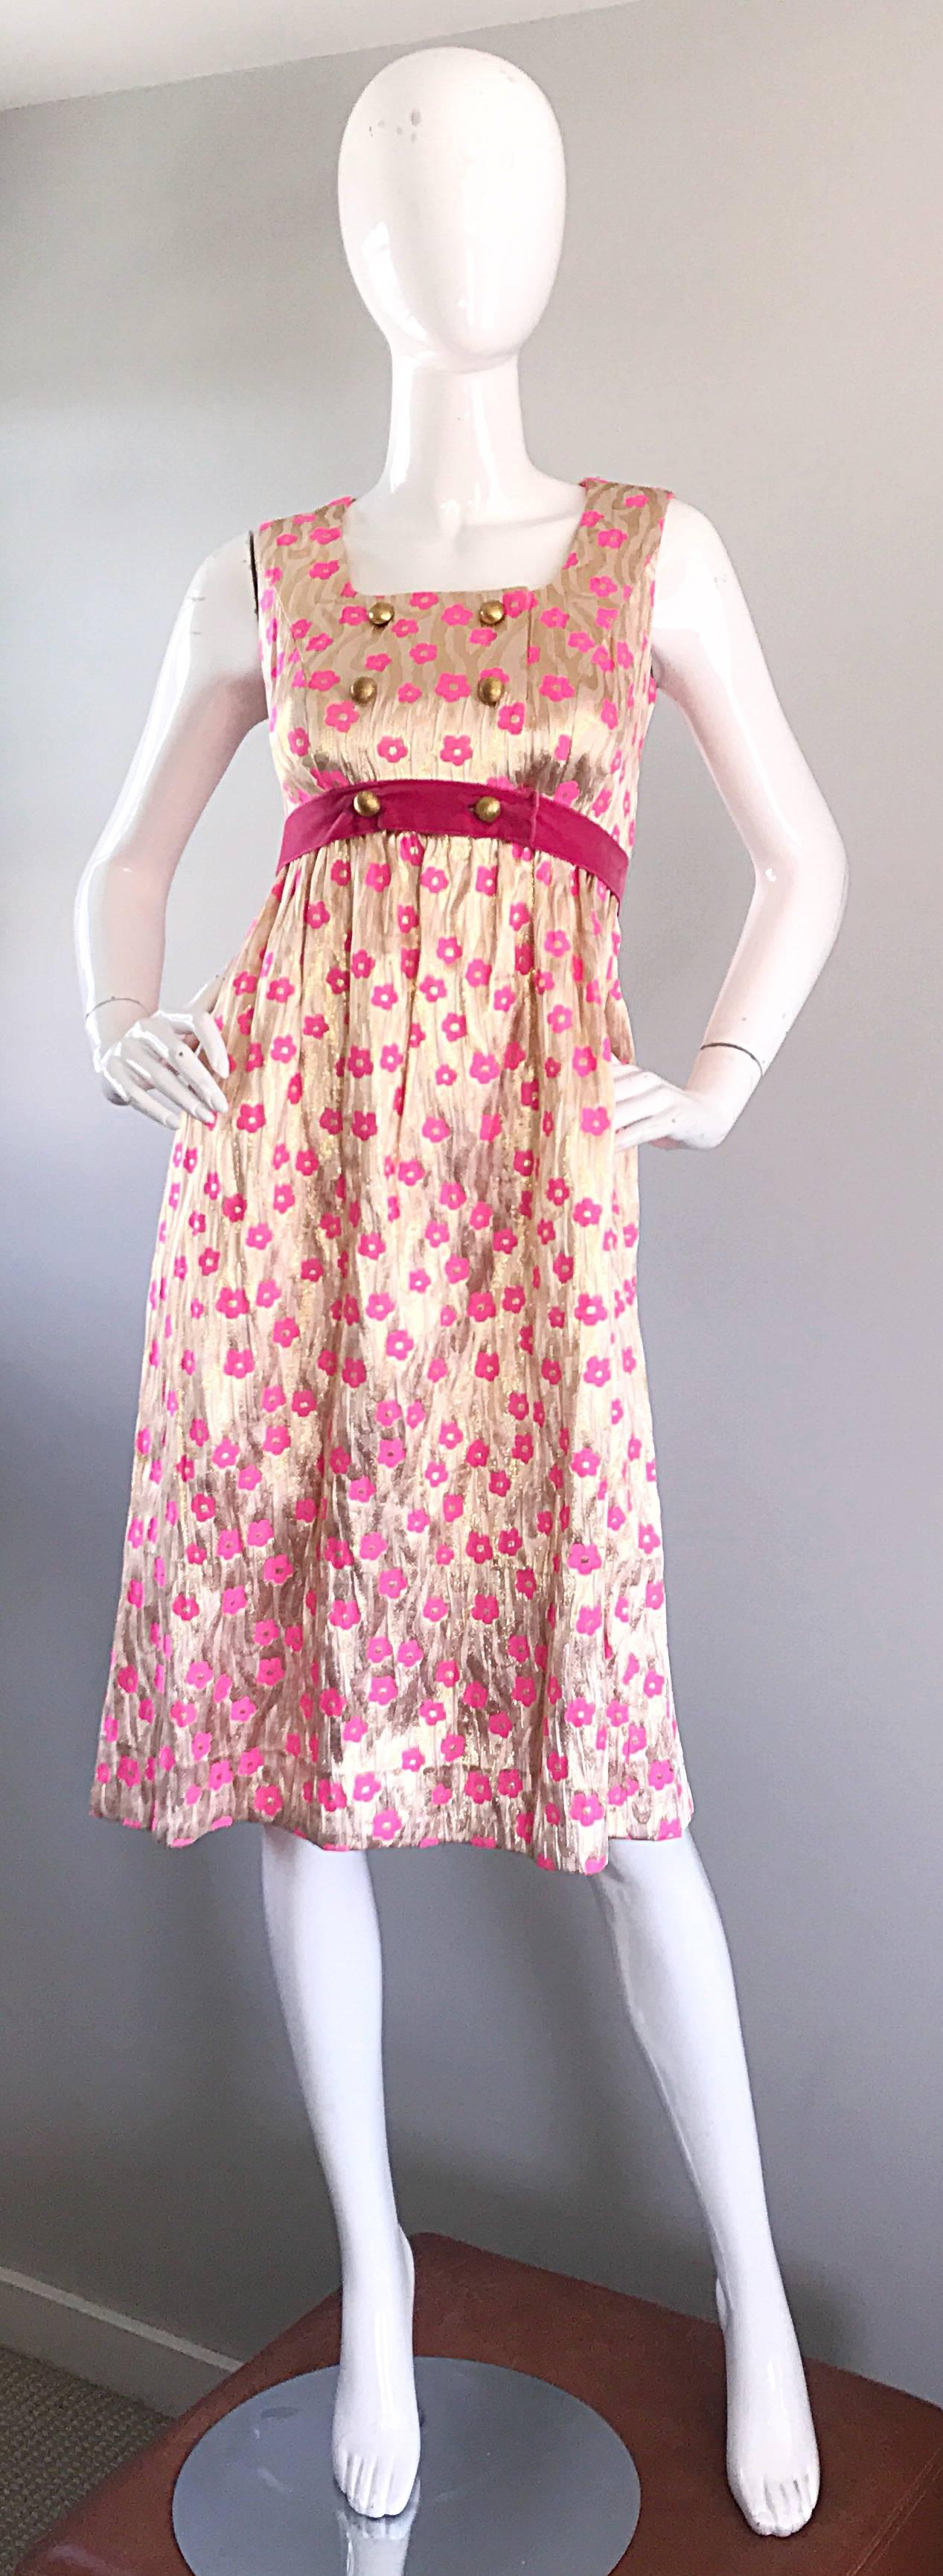 Amazing 1960s metallic gold and pink poppy flower print A-Line dress! Features gold metallic silk with hot pink poppies throughout. Six gold mock buttons on the bodice. Attached pink velvet wrap around belt snaps at side waist. Perfect tea length is